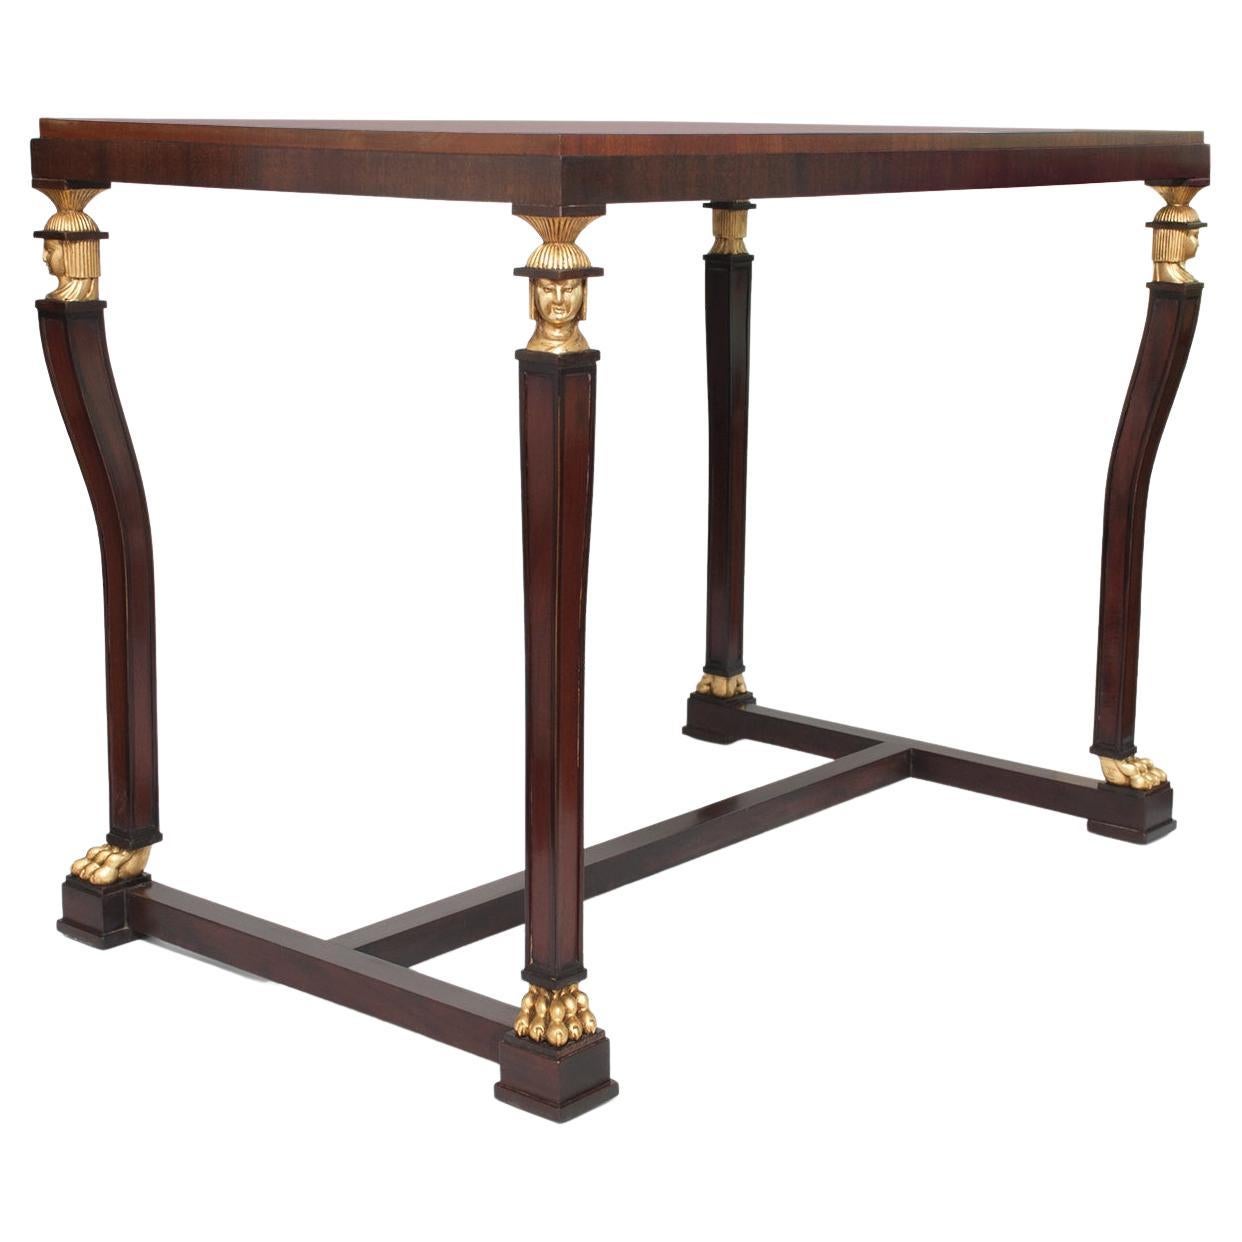 Axel Einar Hjorth Swedish Grace Mahogany Console Center Table for NK, Stockholm